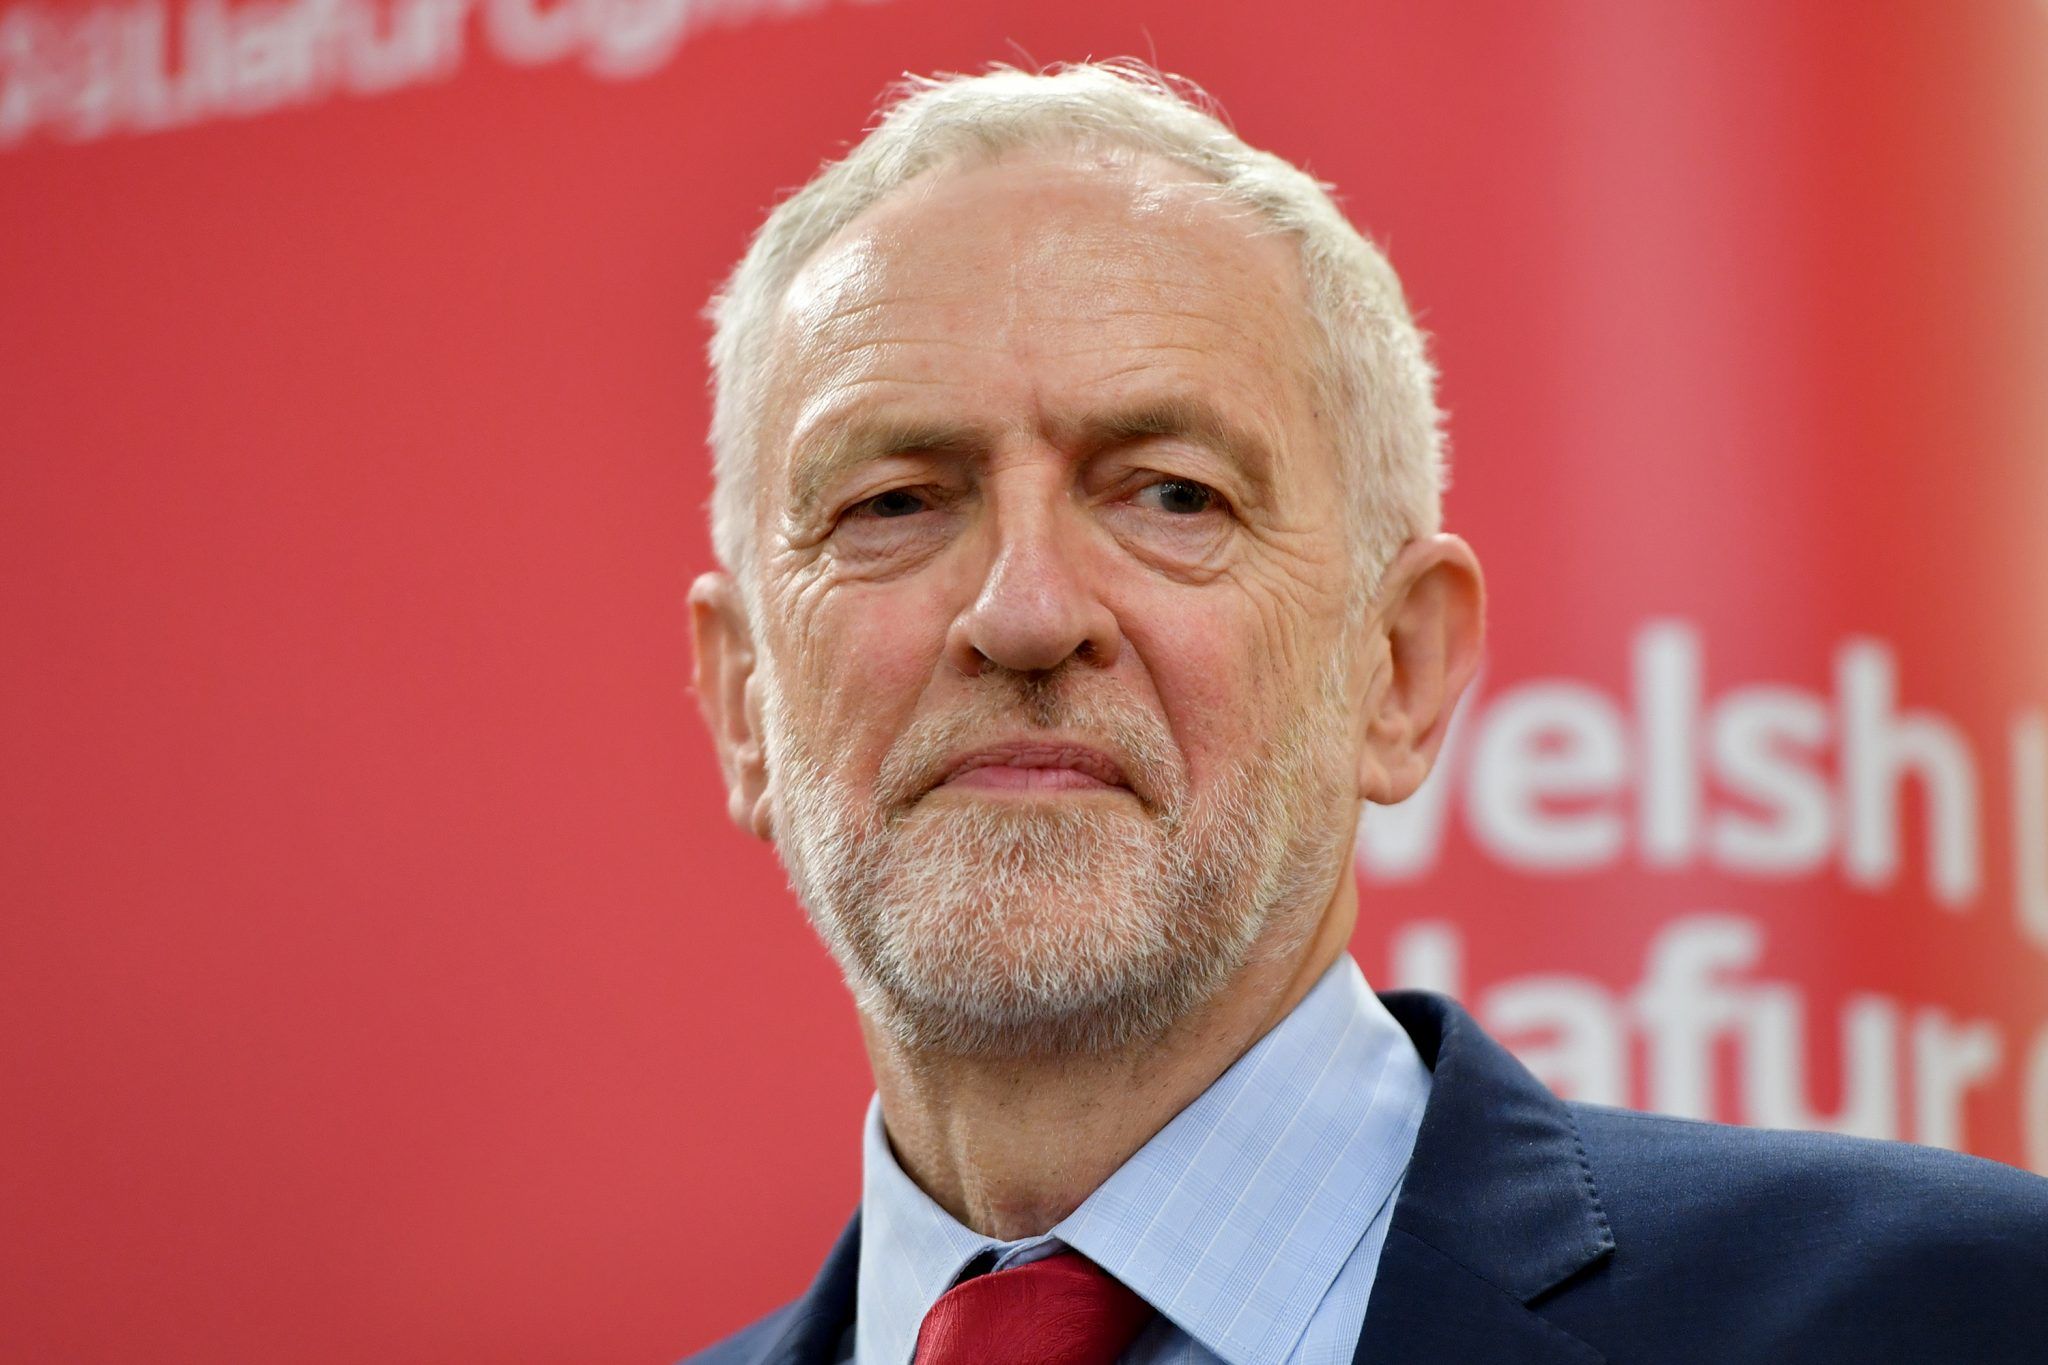 Jeremy Corbyn has defended Shamima Begum's right to legal aid (Credit: Anthony Devlin)